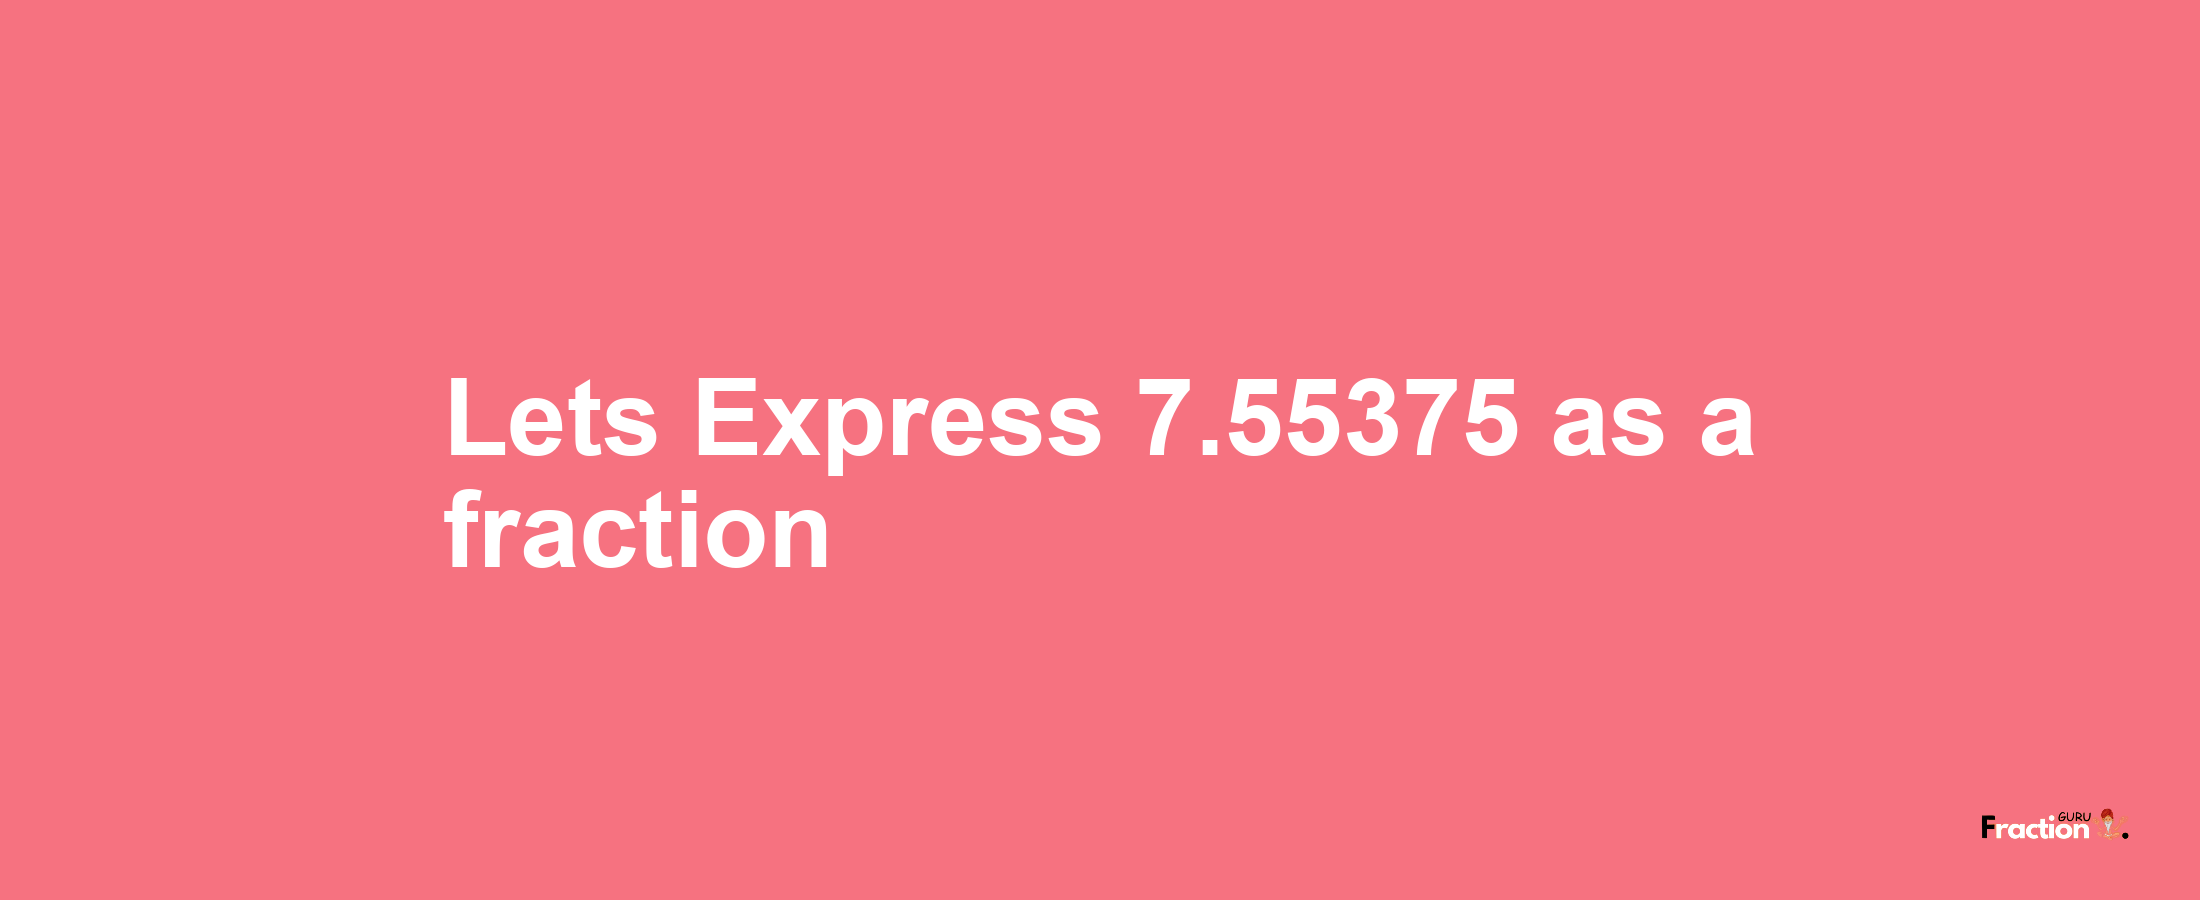 Lets Express 7.55375 as afraction